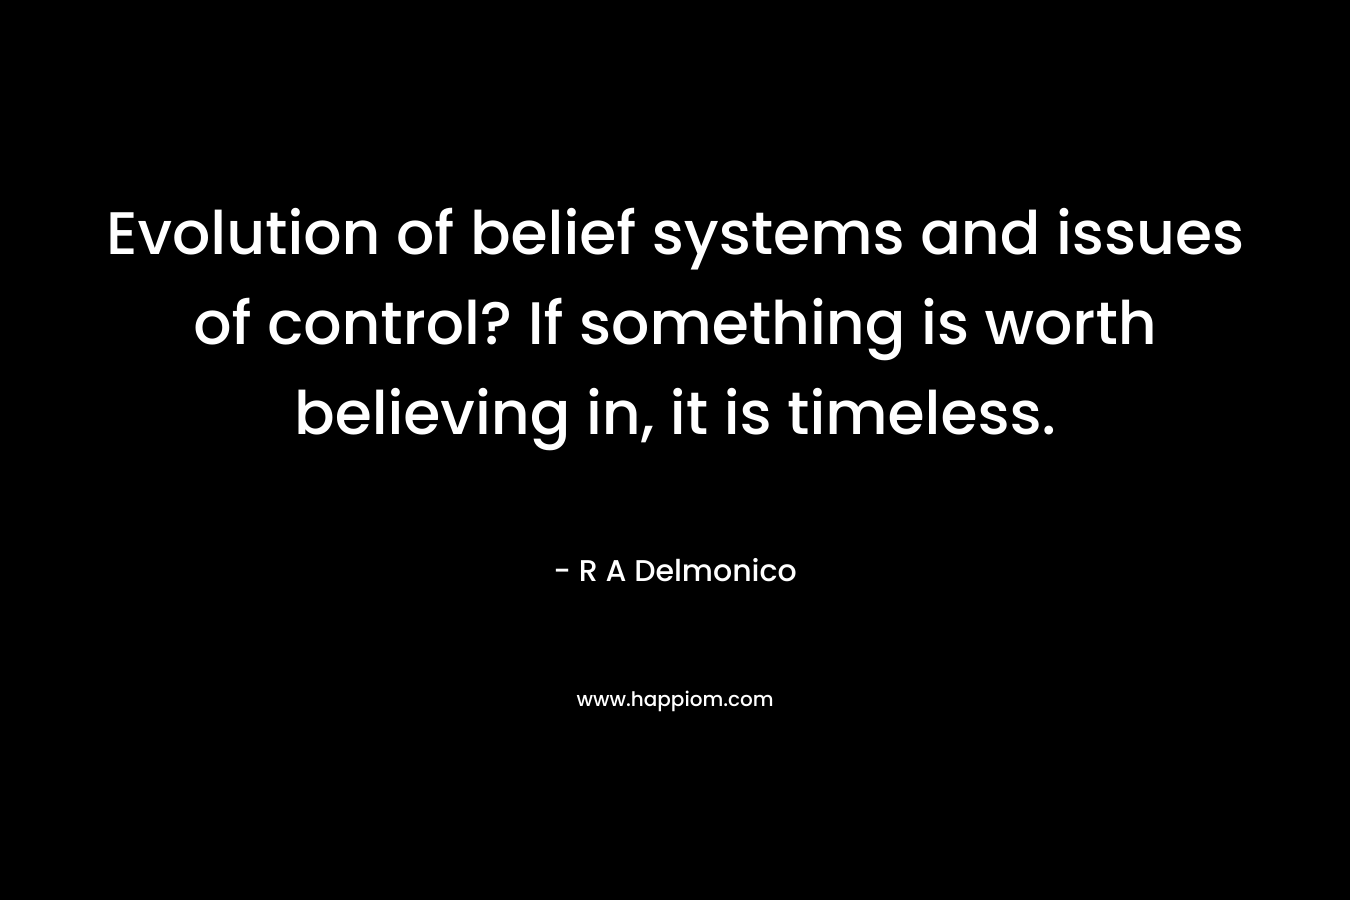 Evolution of belief systems and issues of control? If something is worth believing in, it is timeless. – R A Delmonico